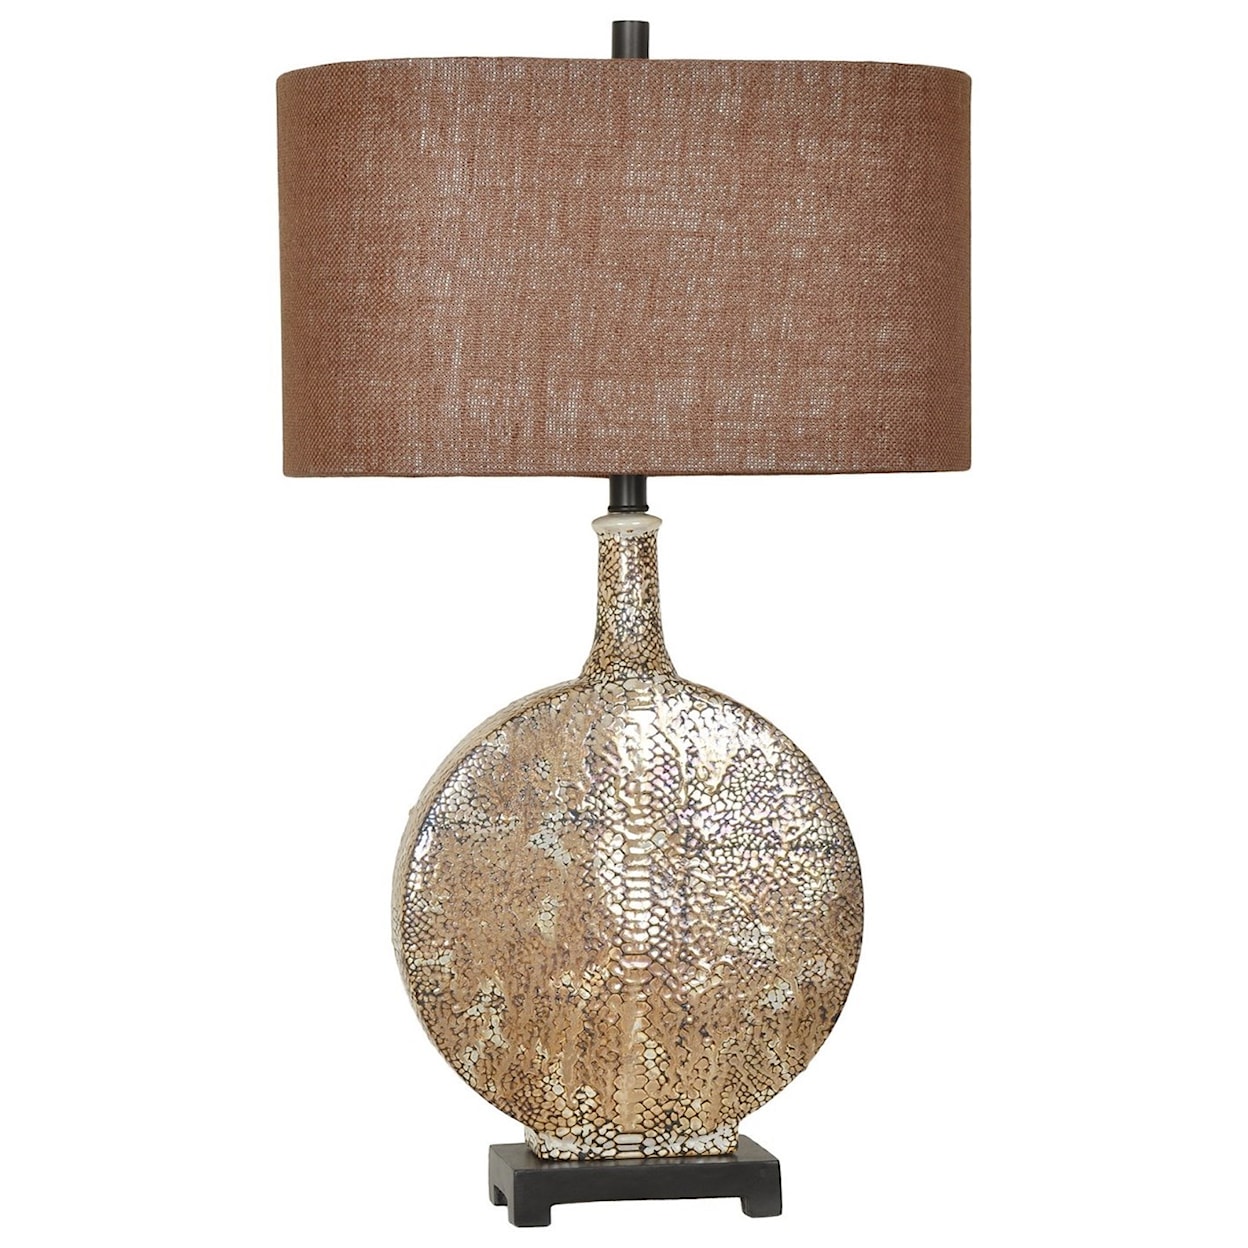 Crestview Collection Lighting Norris Table Lamp